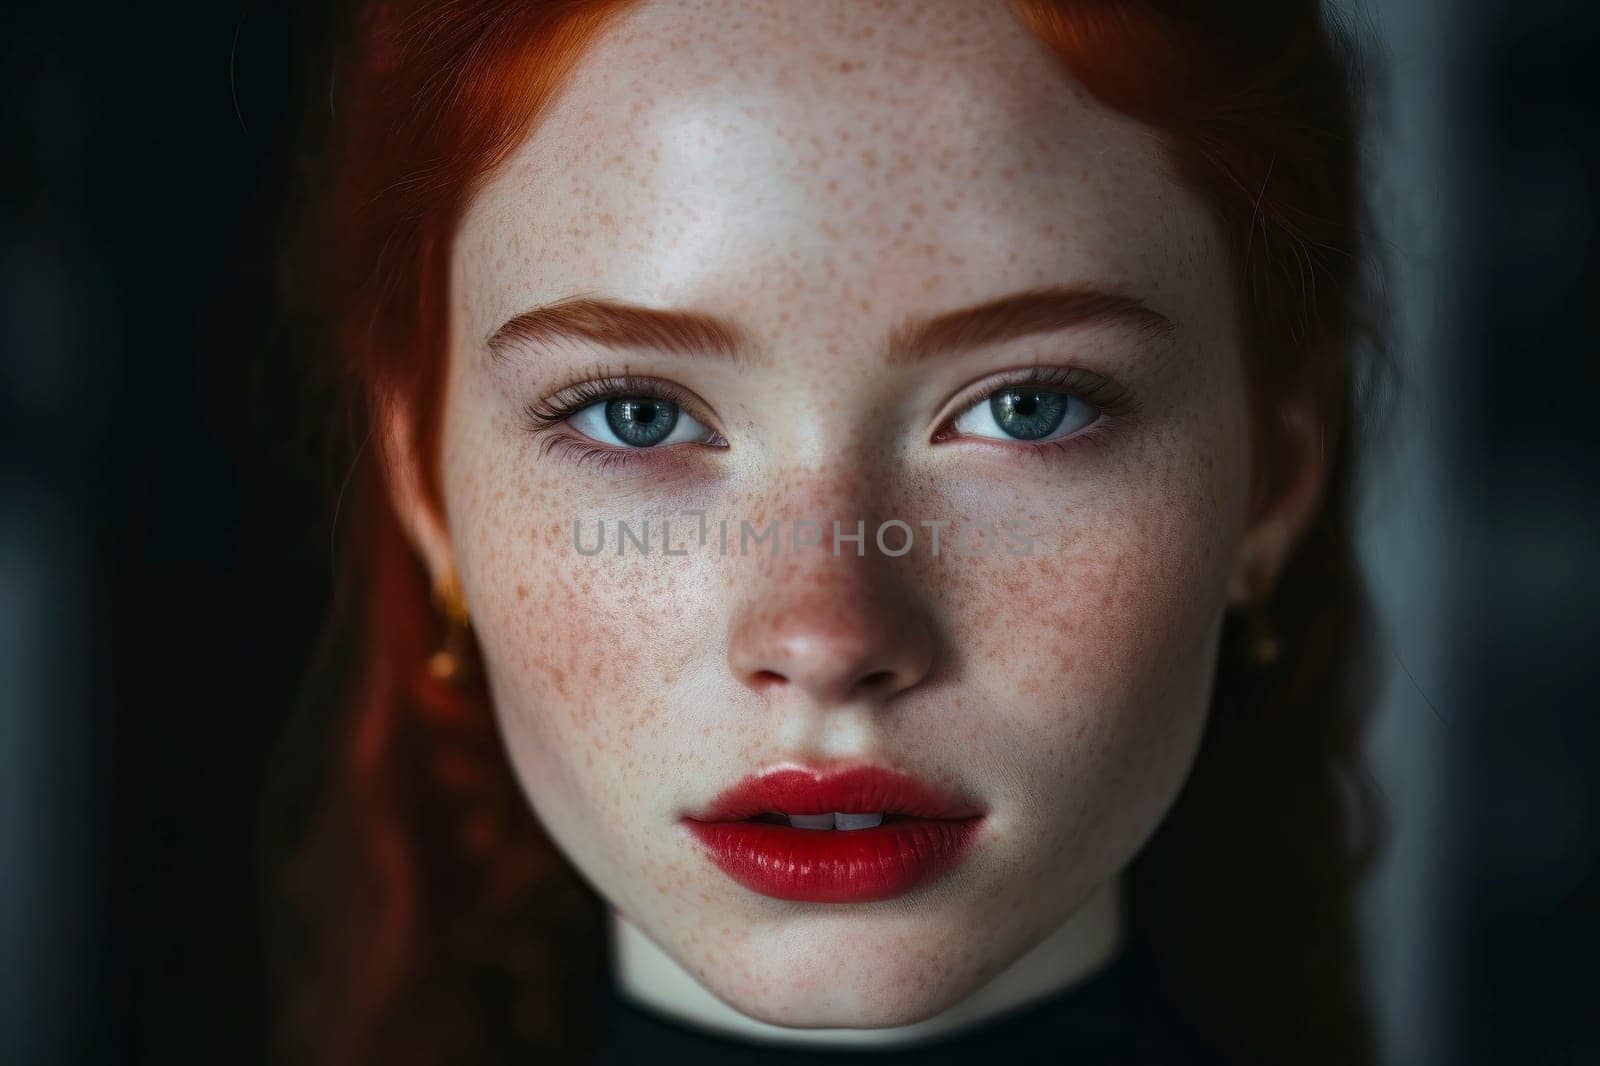 Captivating close-up portrait of a redhead girl with freckles, showcasing her unique beauty.